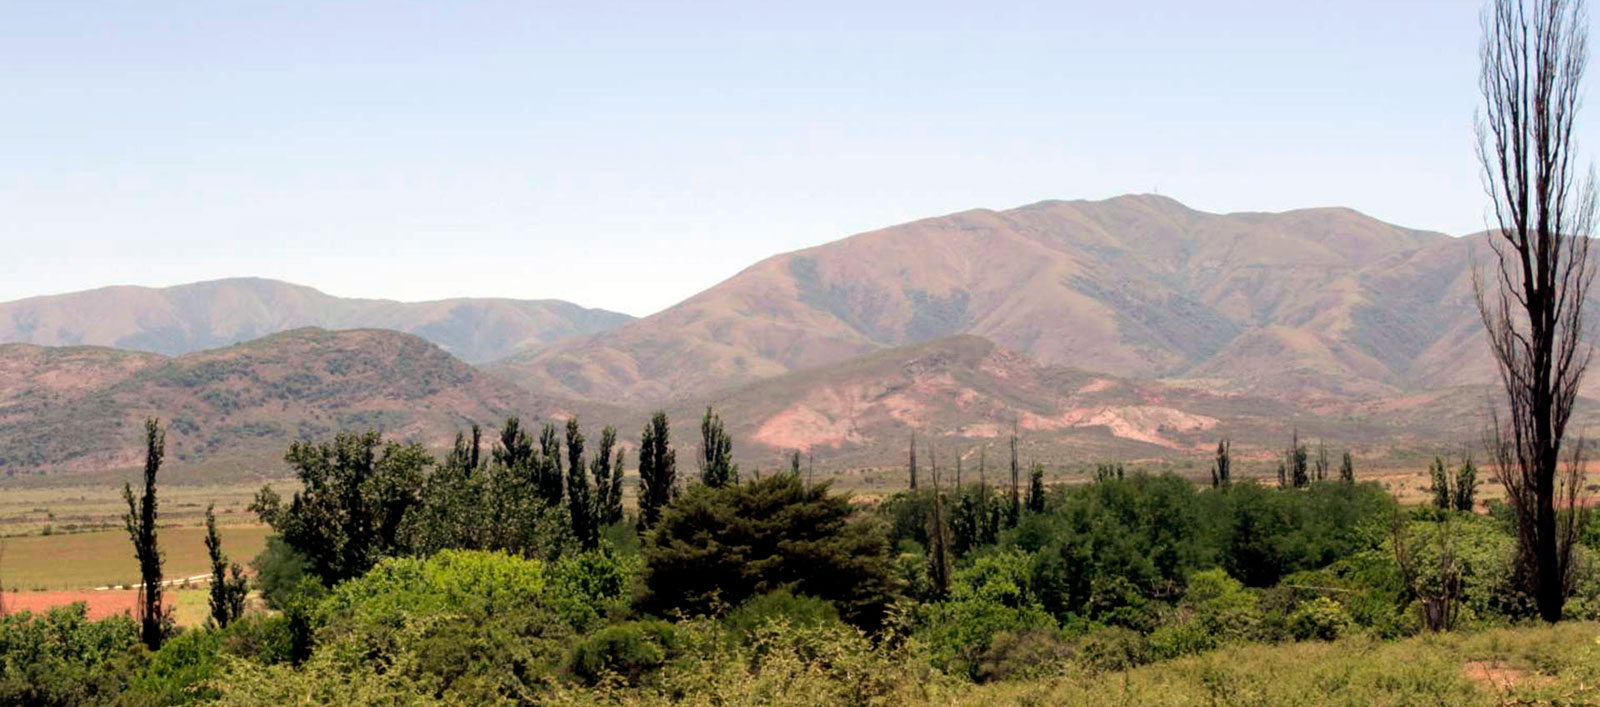 The Lerma Valley - Northern Argentina